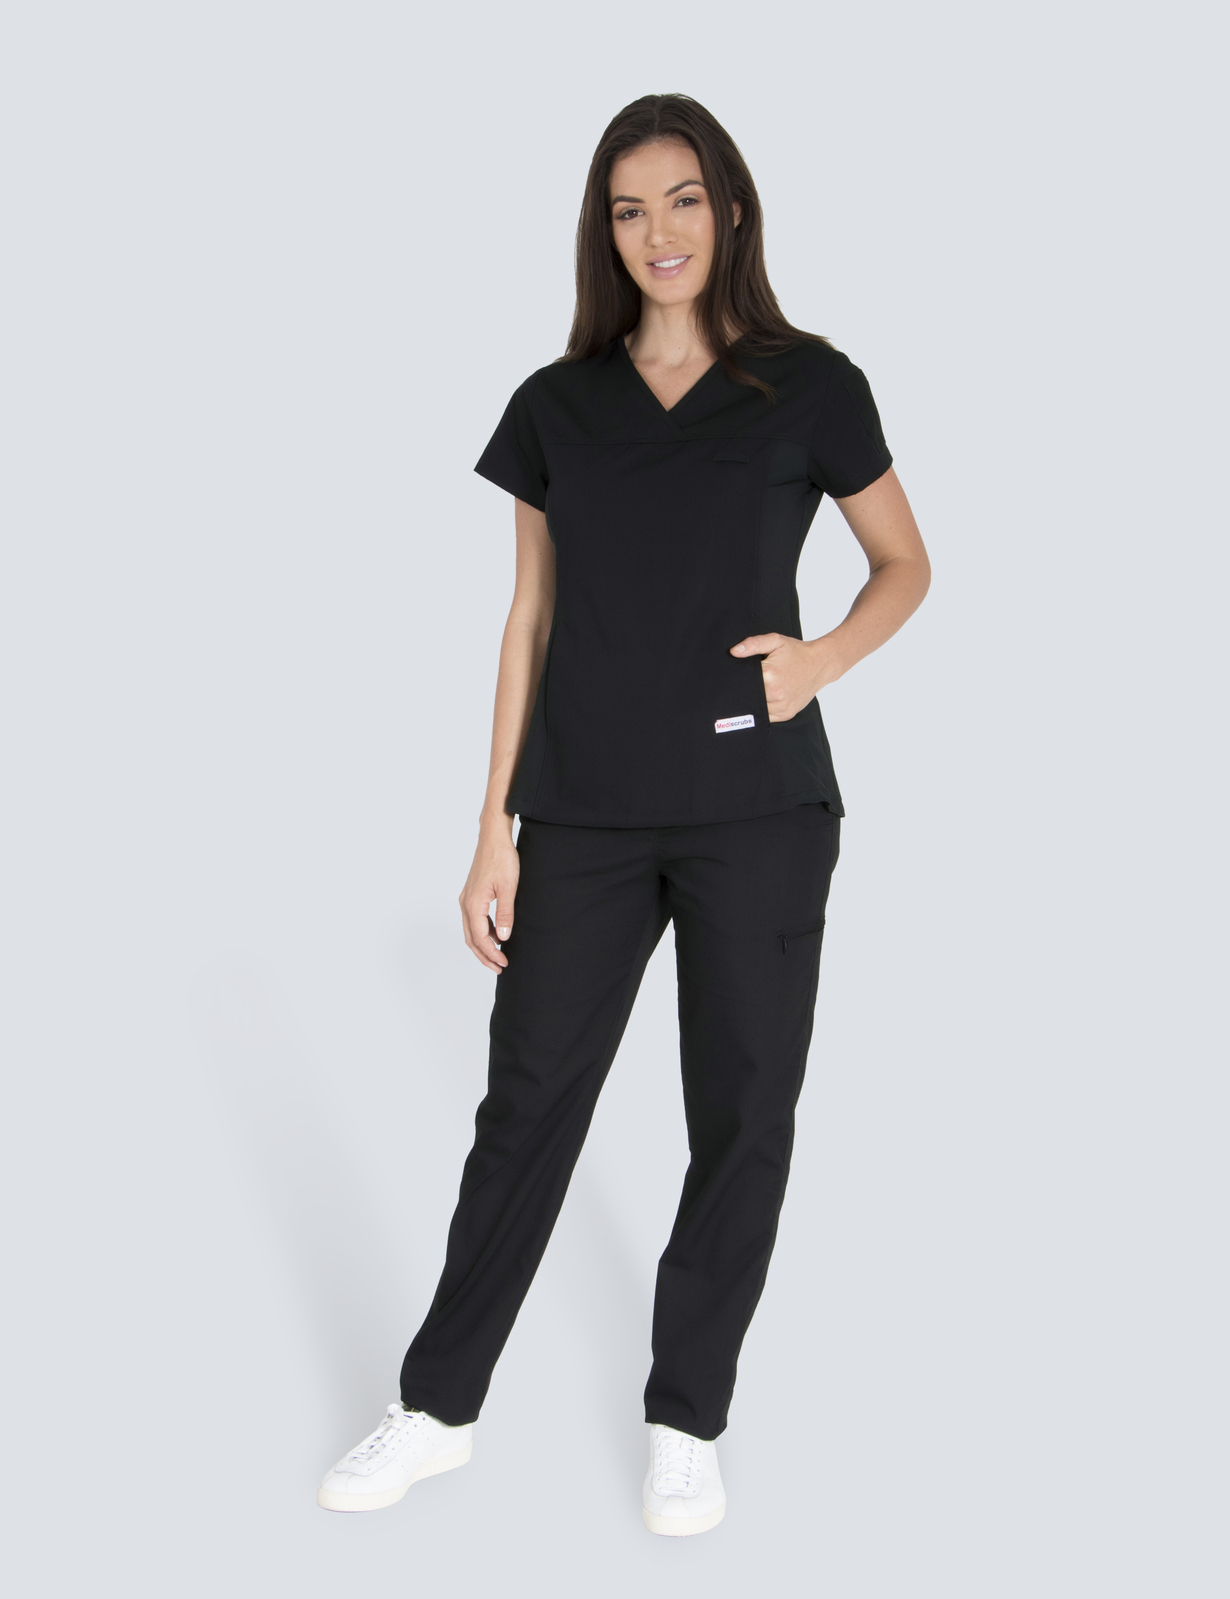 Canberra Hospital Medical Imaging Nuclear Medicine  Uniform Set Bundle (Wome'ns Fit Spandex Top and Cargo Pants in Royal + Logos)